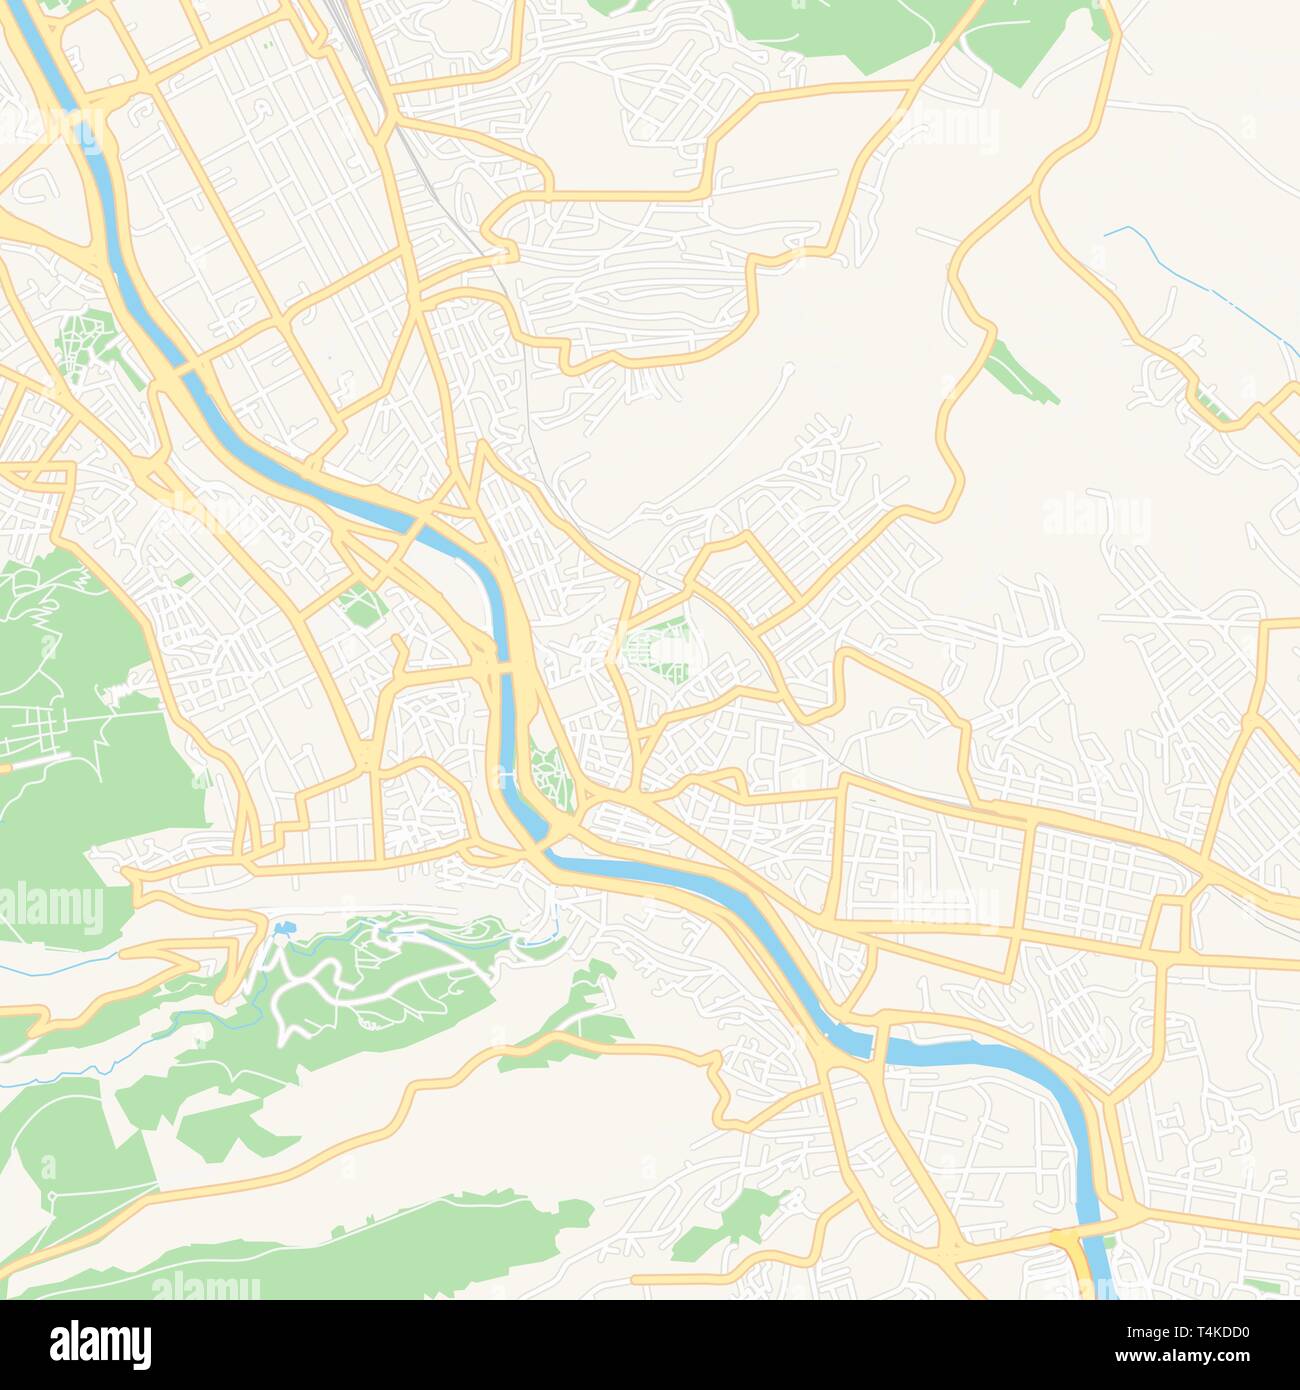 Printable map of Tbilisi, Georgia with main and secondary roads and larger railways. This map is carefully designed for routing and placing individual Stock Vector